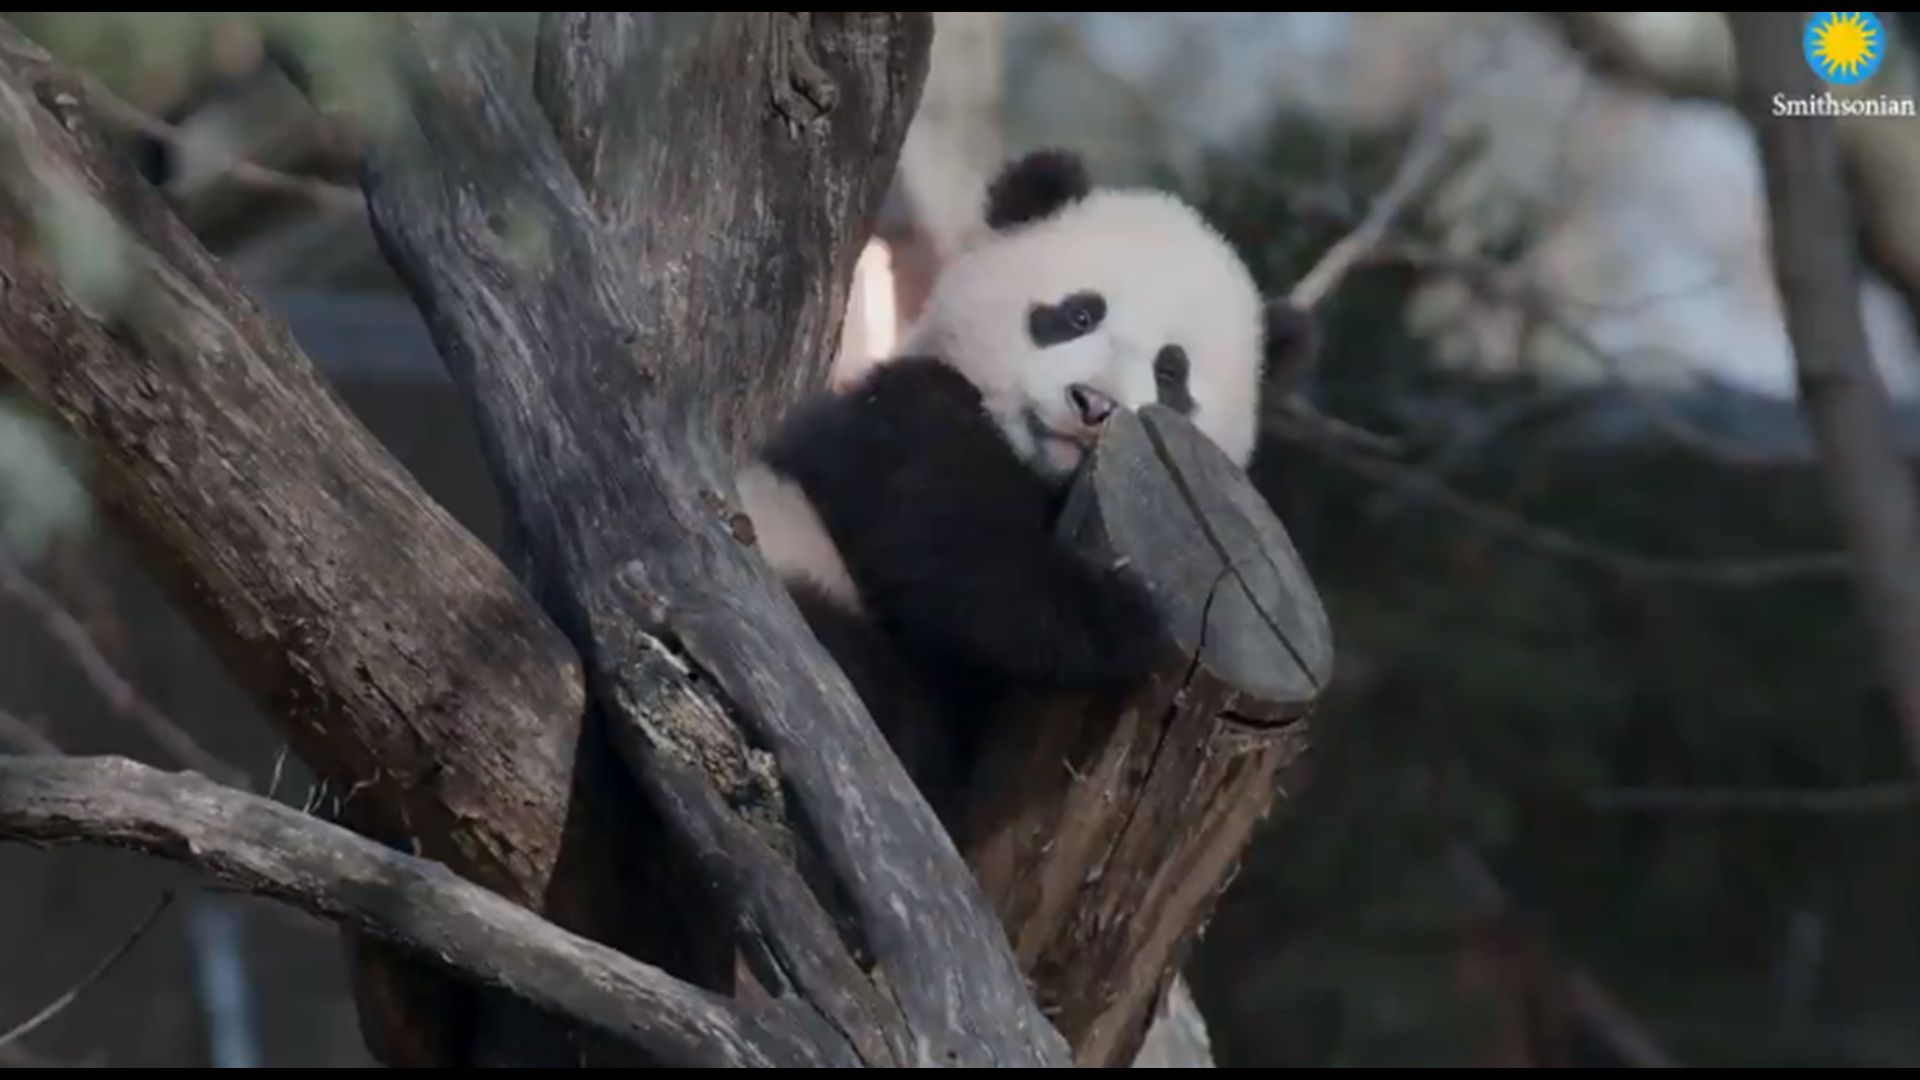 Washingtonians will finally be able to see the panda cub in person starting May 21.